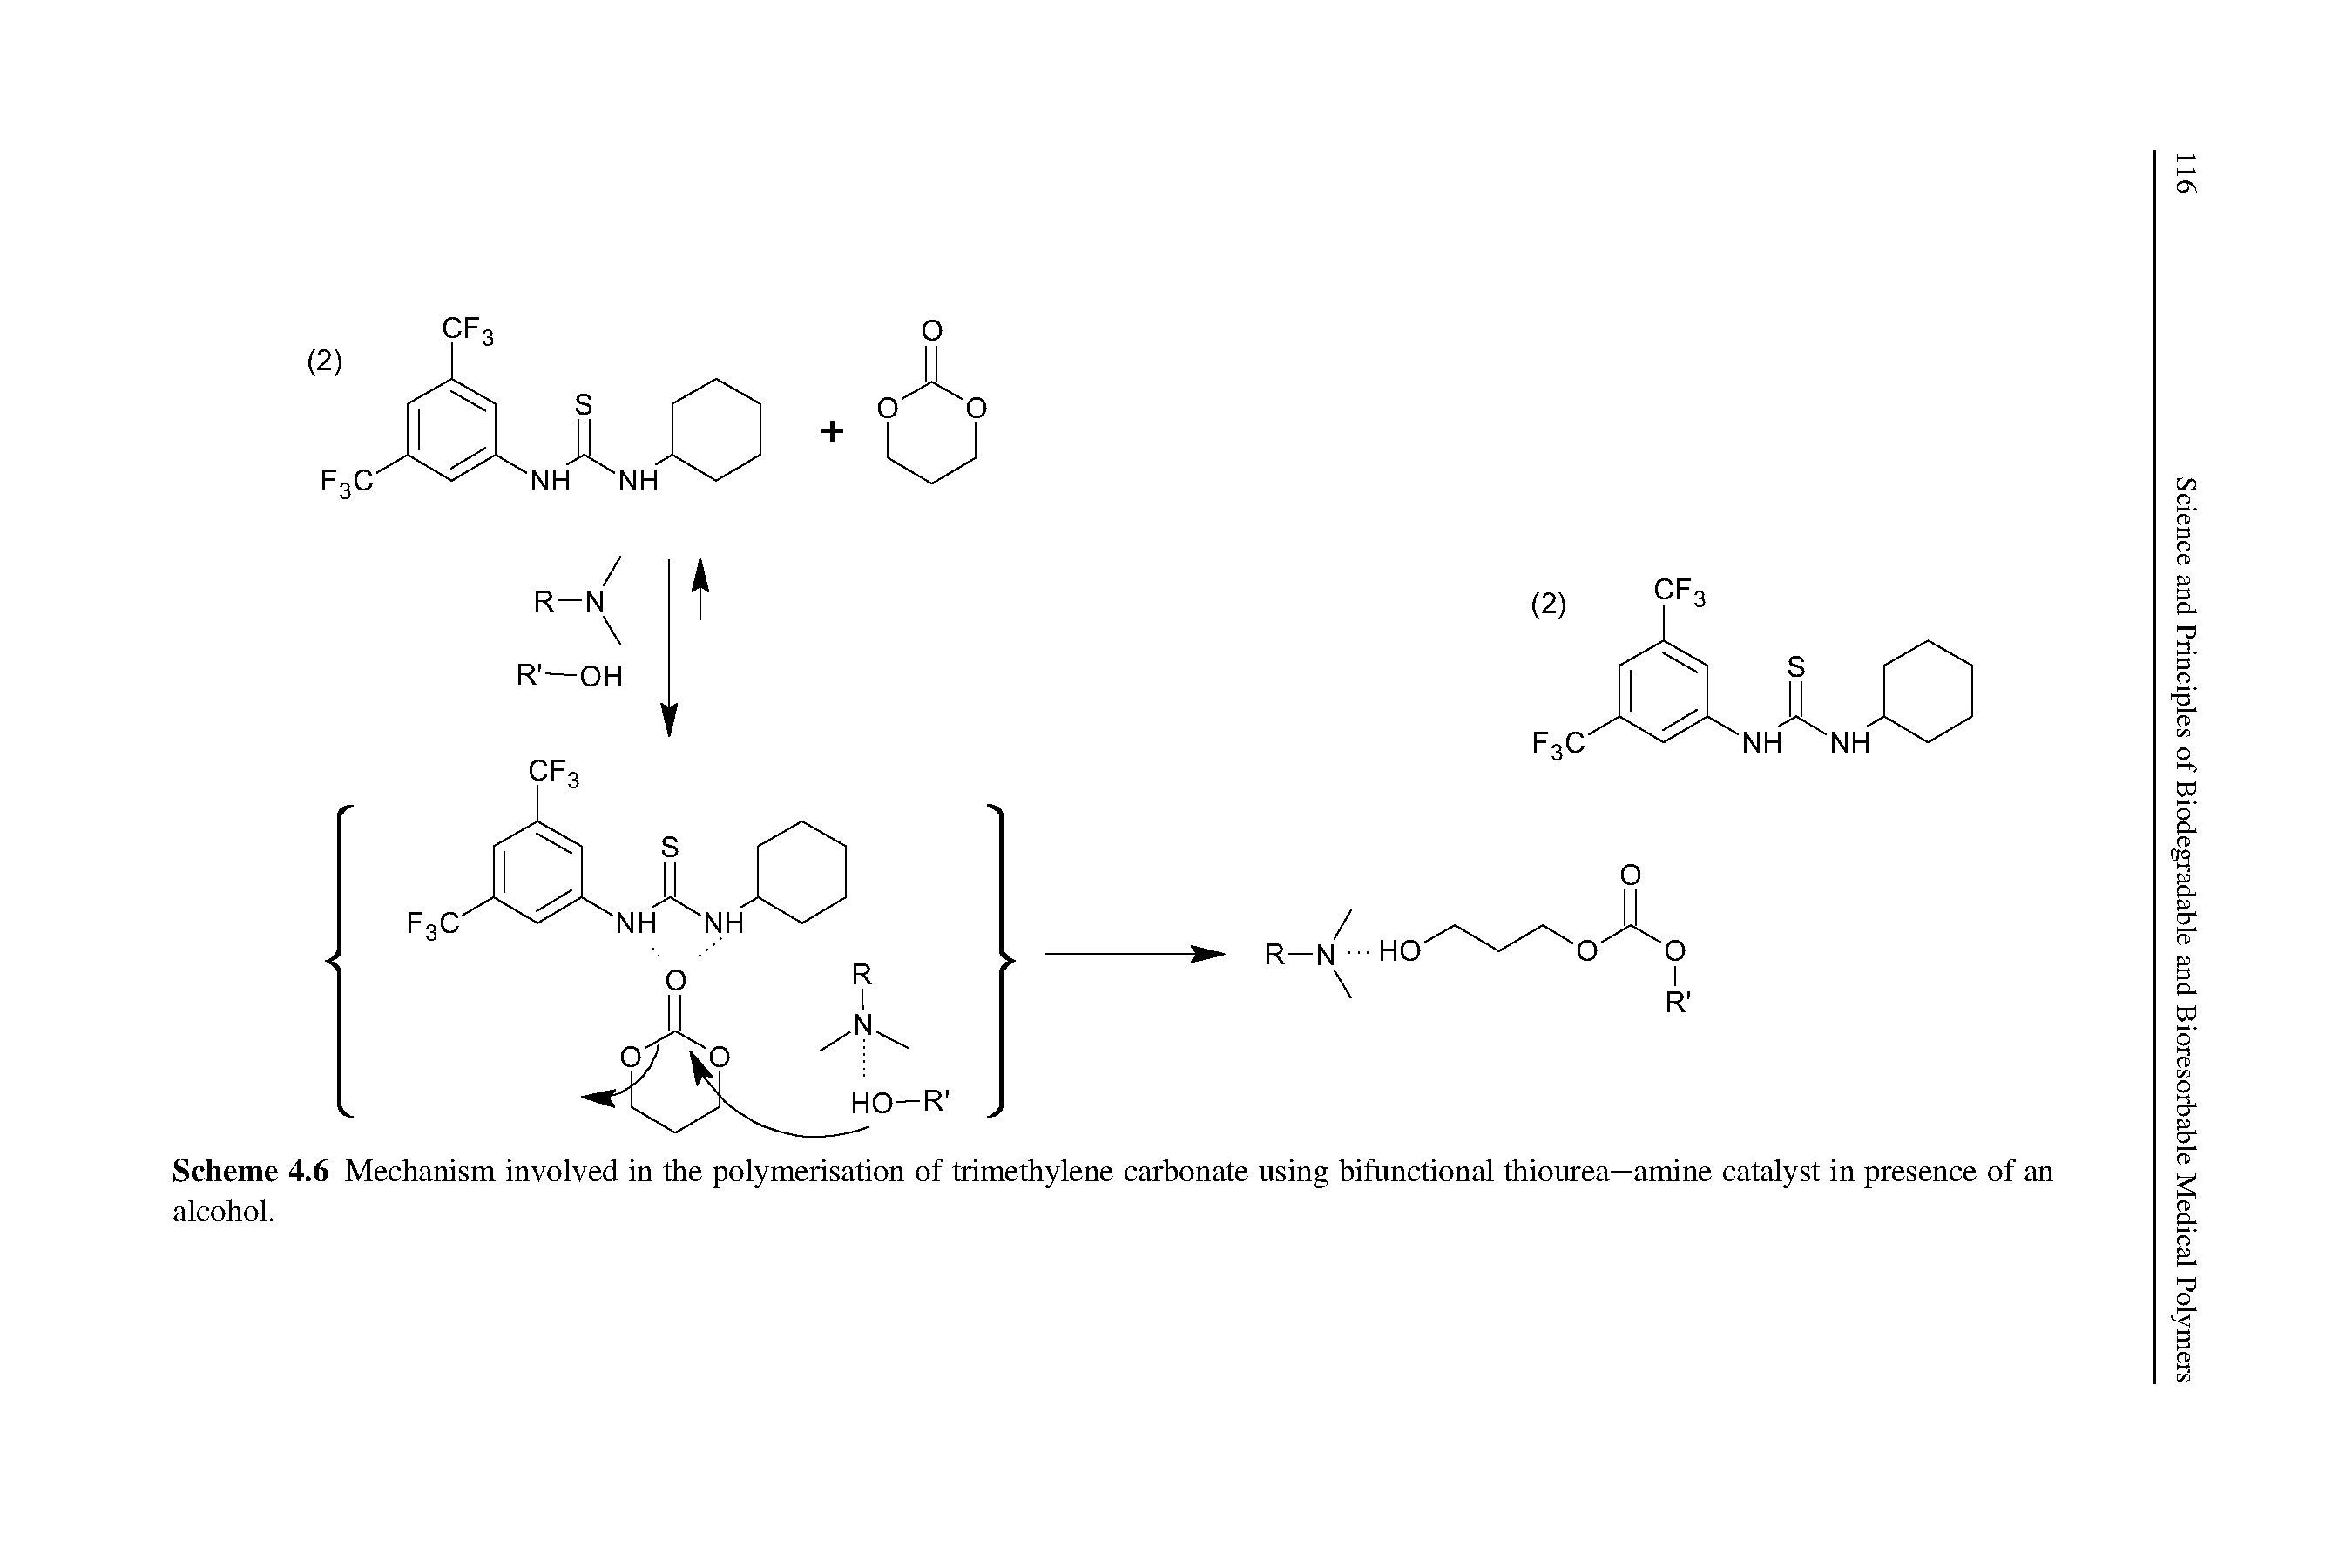 Scheme 4.6 Mechanism involved in the polymerisation of trimethylene carbonate using bifunctional thiourea—amine catalyst in presence of an alcohol.